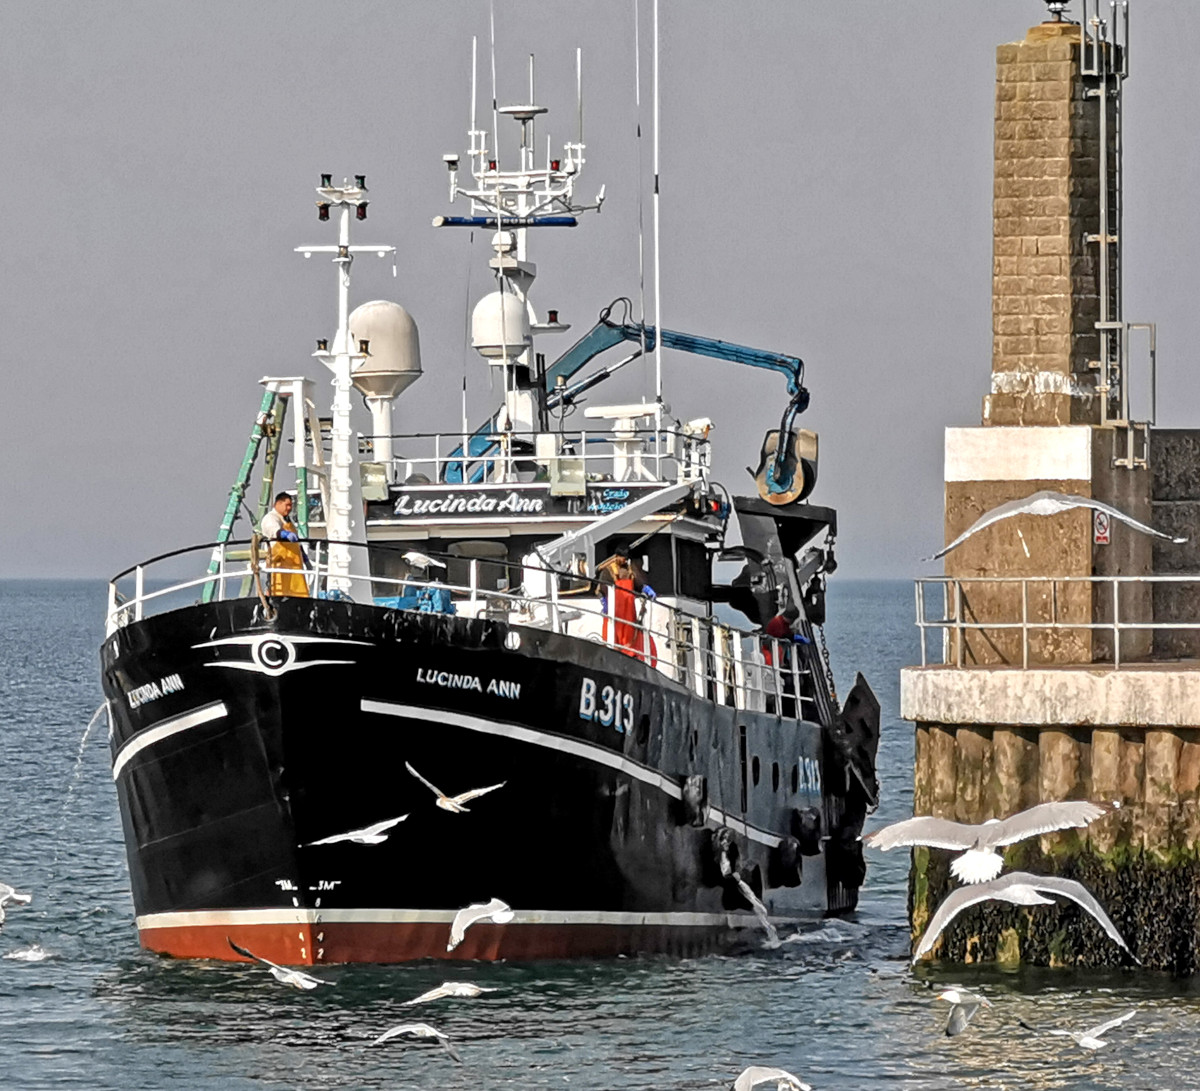 Lucinda Ann returning to Portavogie after a trip at the prawns. (William Cully)